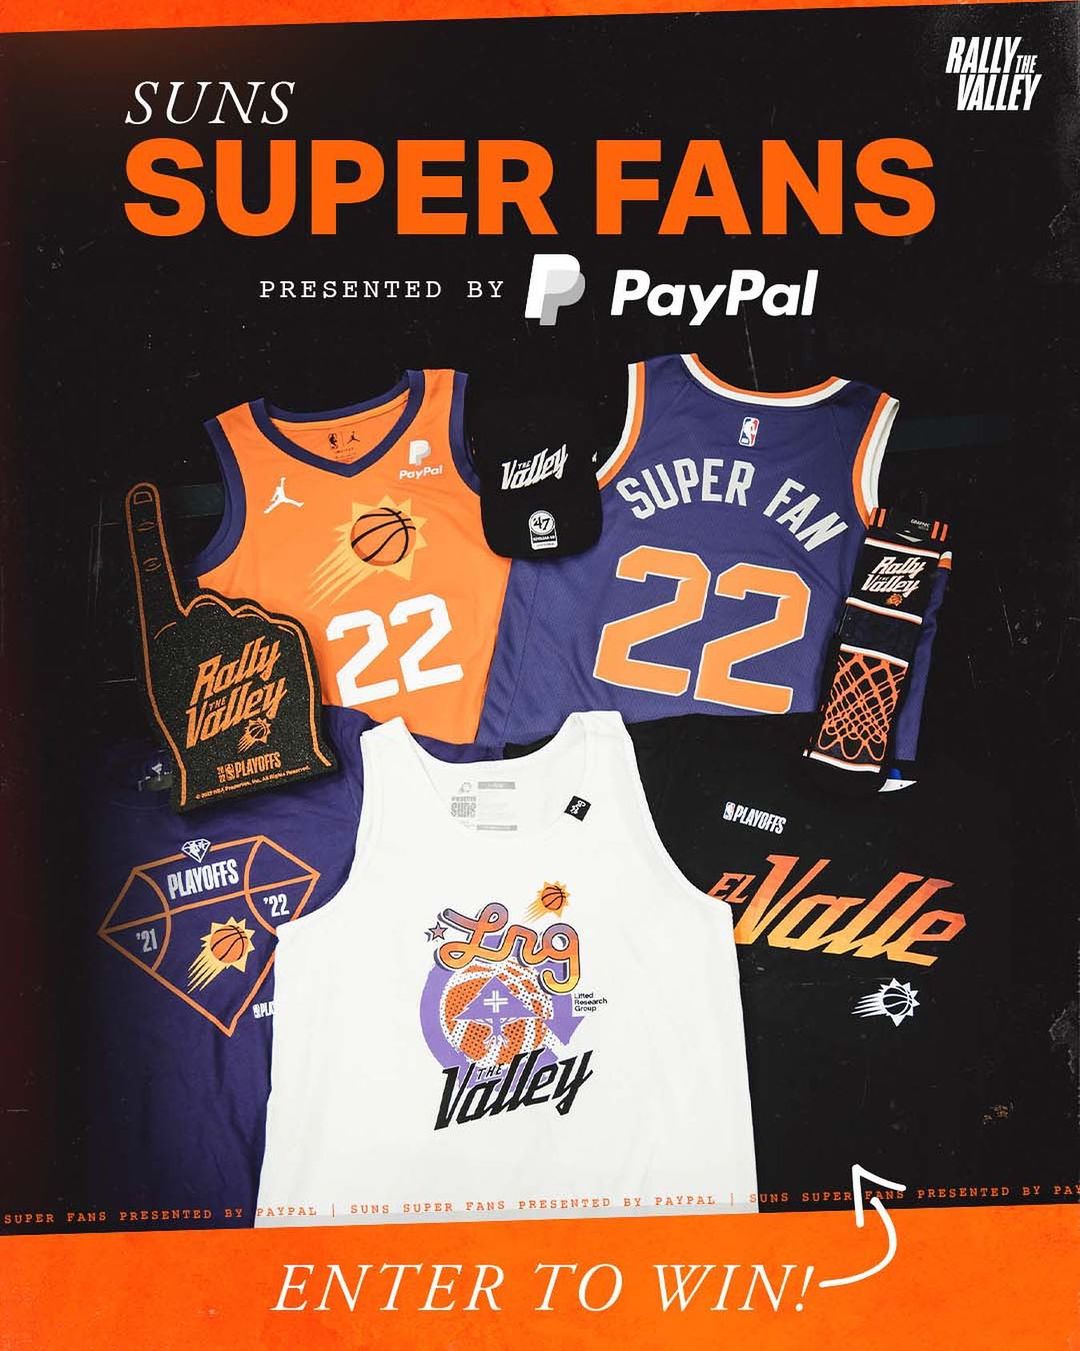 We are searching WORLDWIDE for our Suns Super Fans!  Tell us why you deserve to...